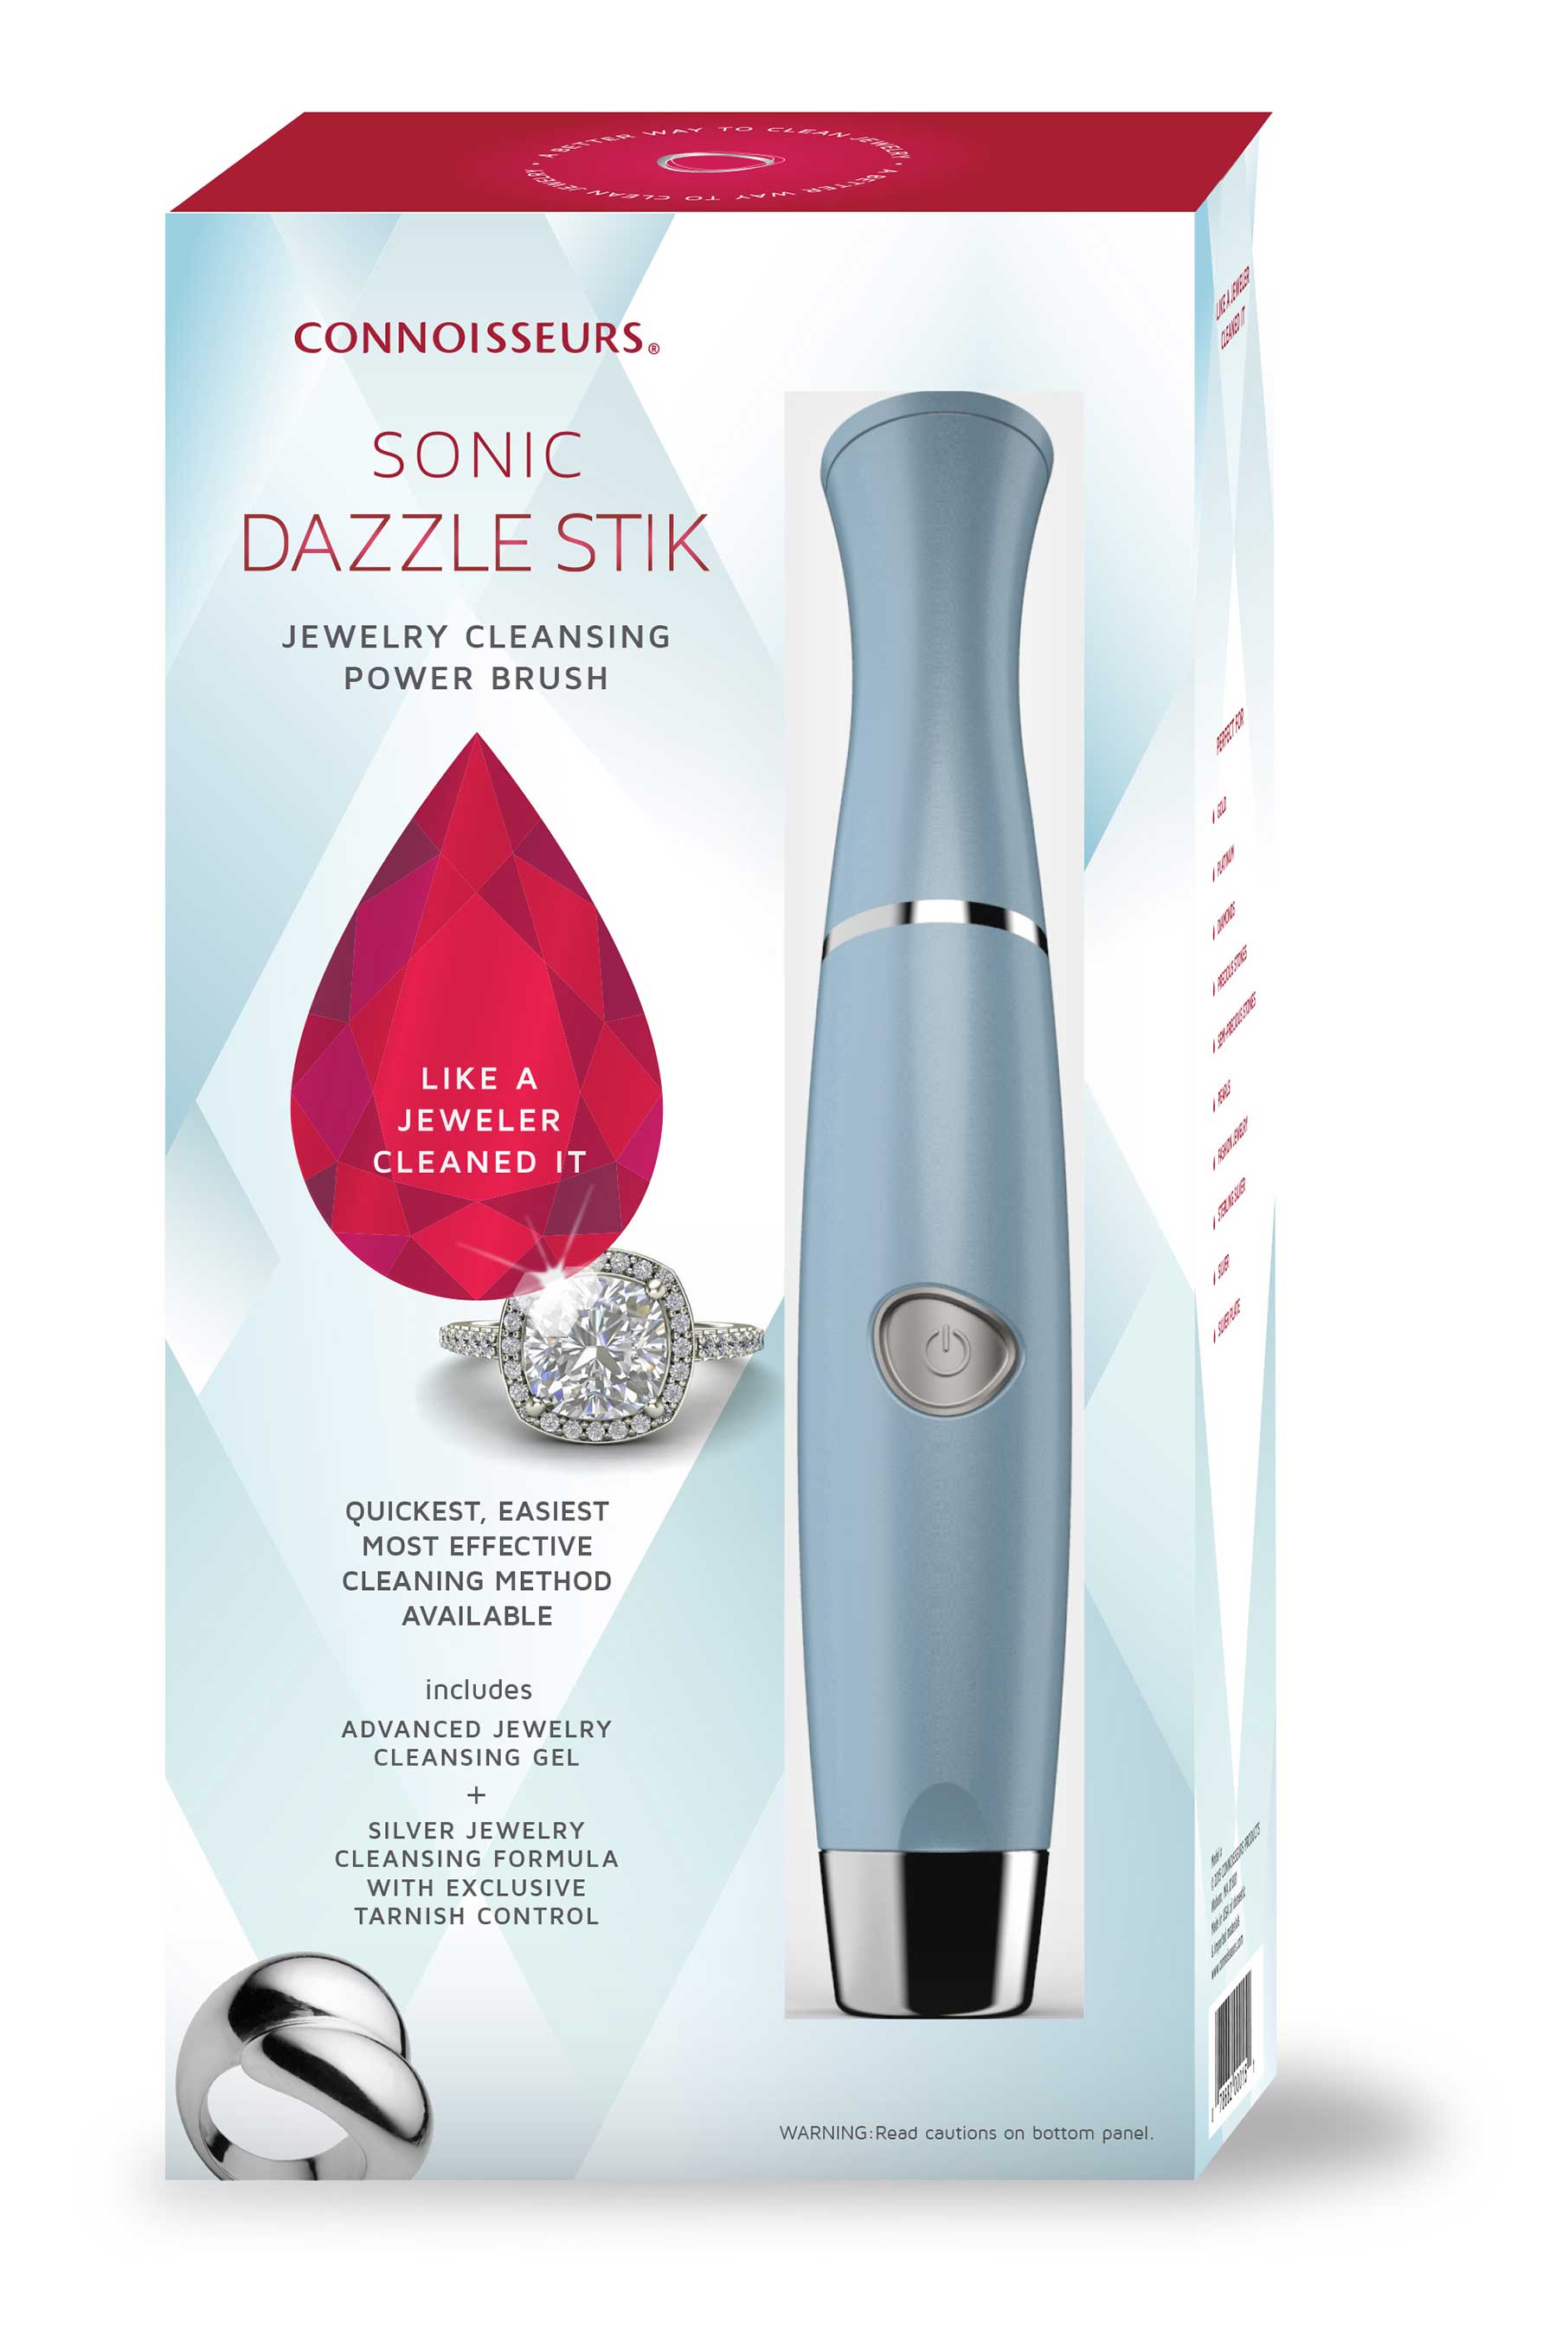 Jewelry Cleaner. Silver Dazzle Drops. Connoisseurs 